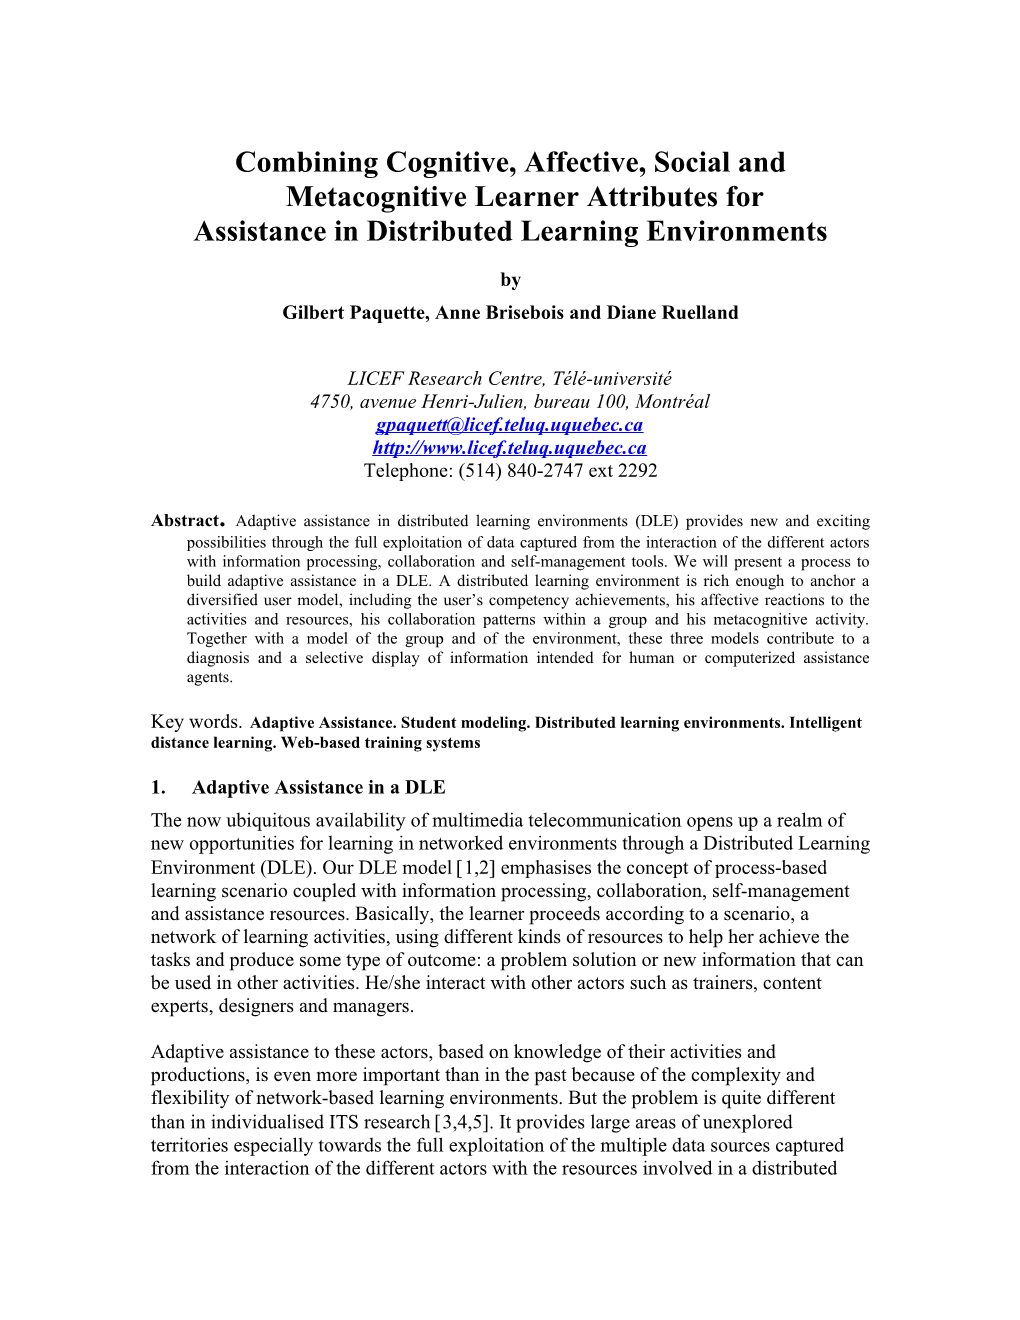 Combining Cognitive, Affective, Social and Metacognitive Learner Attributes For